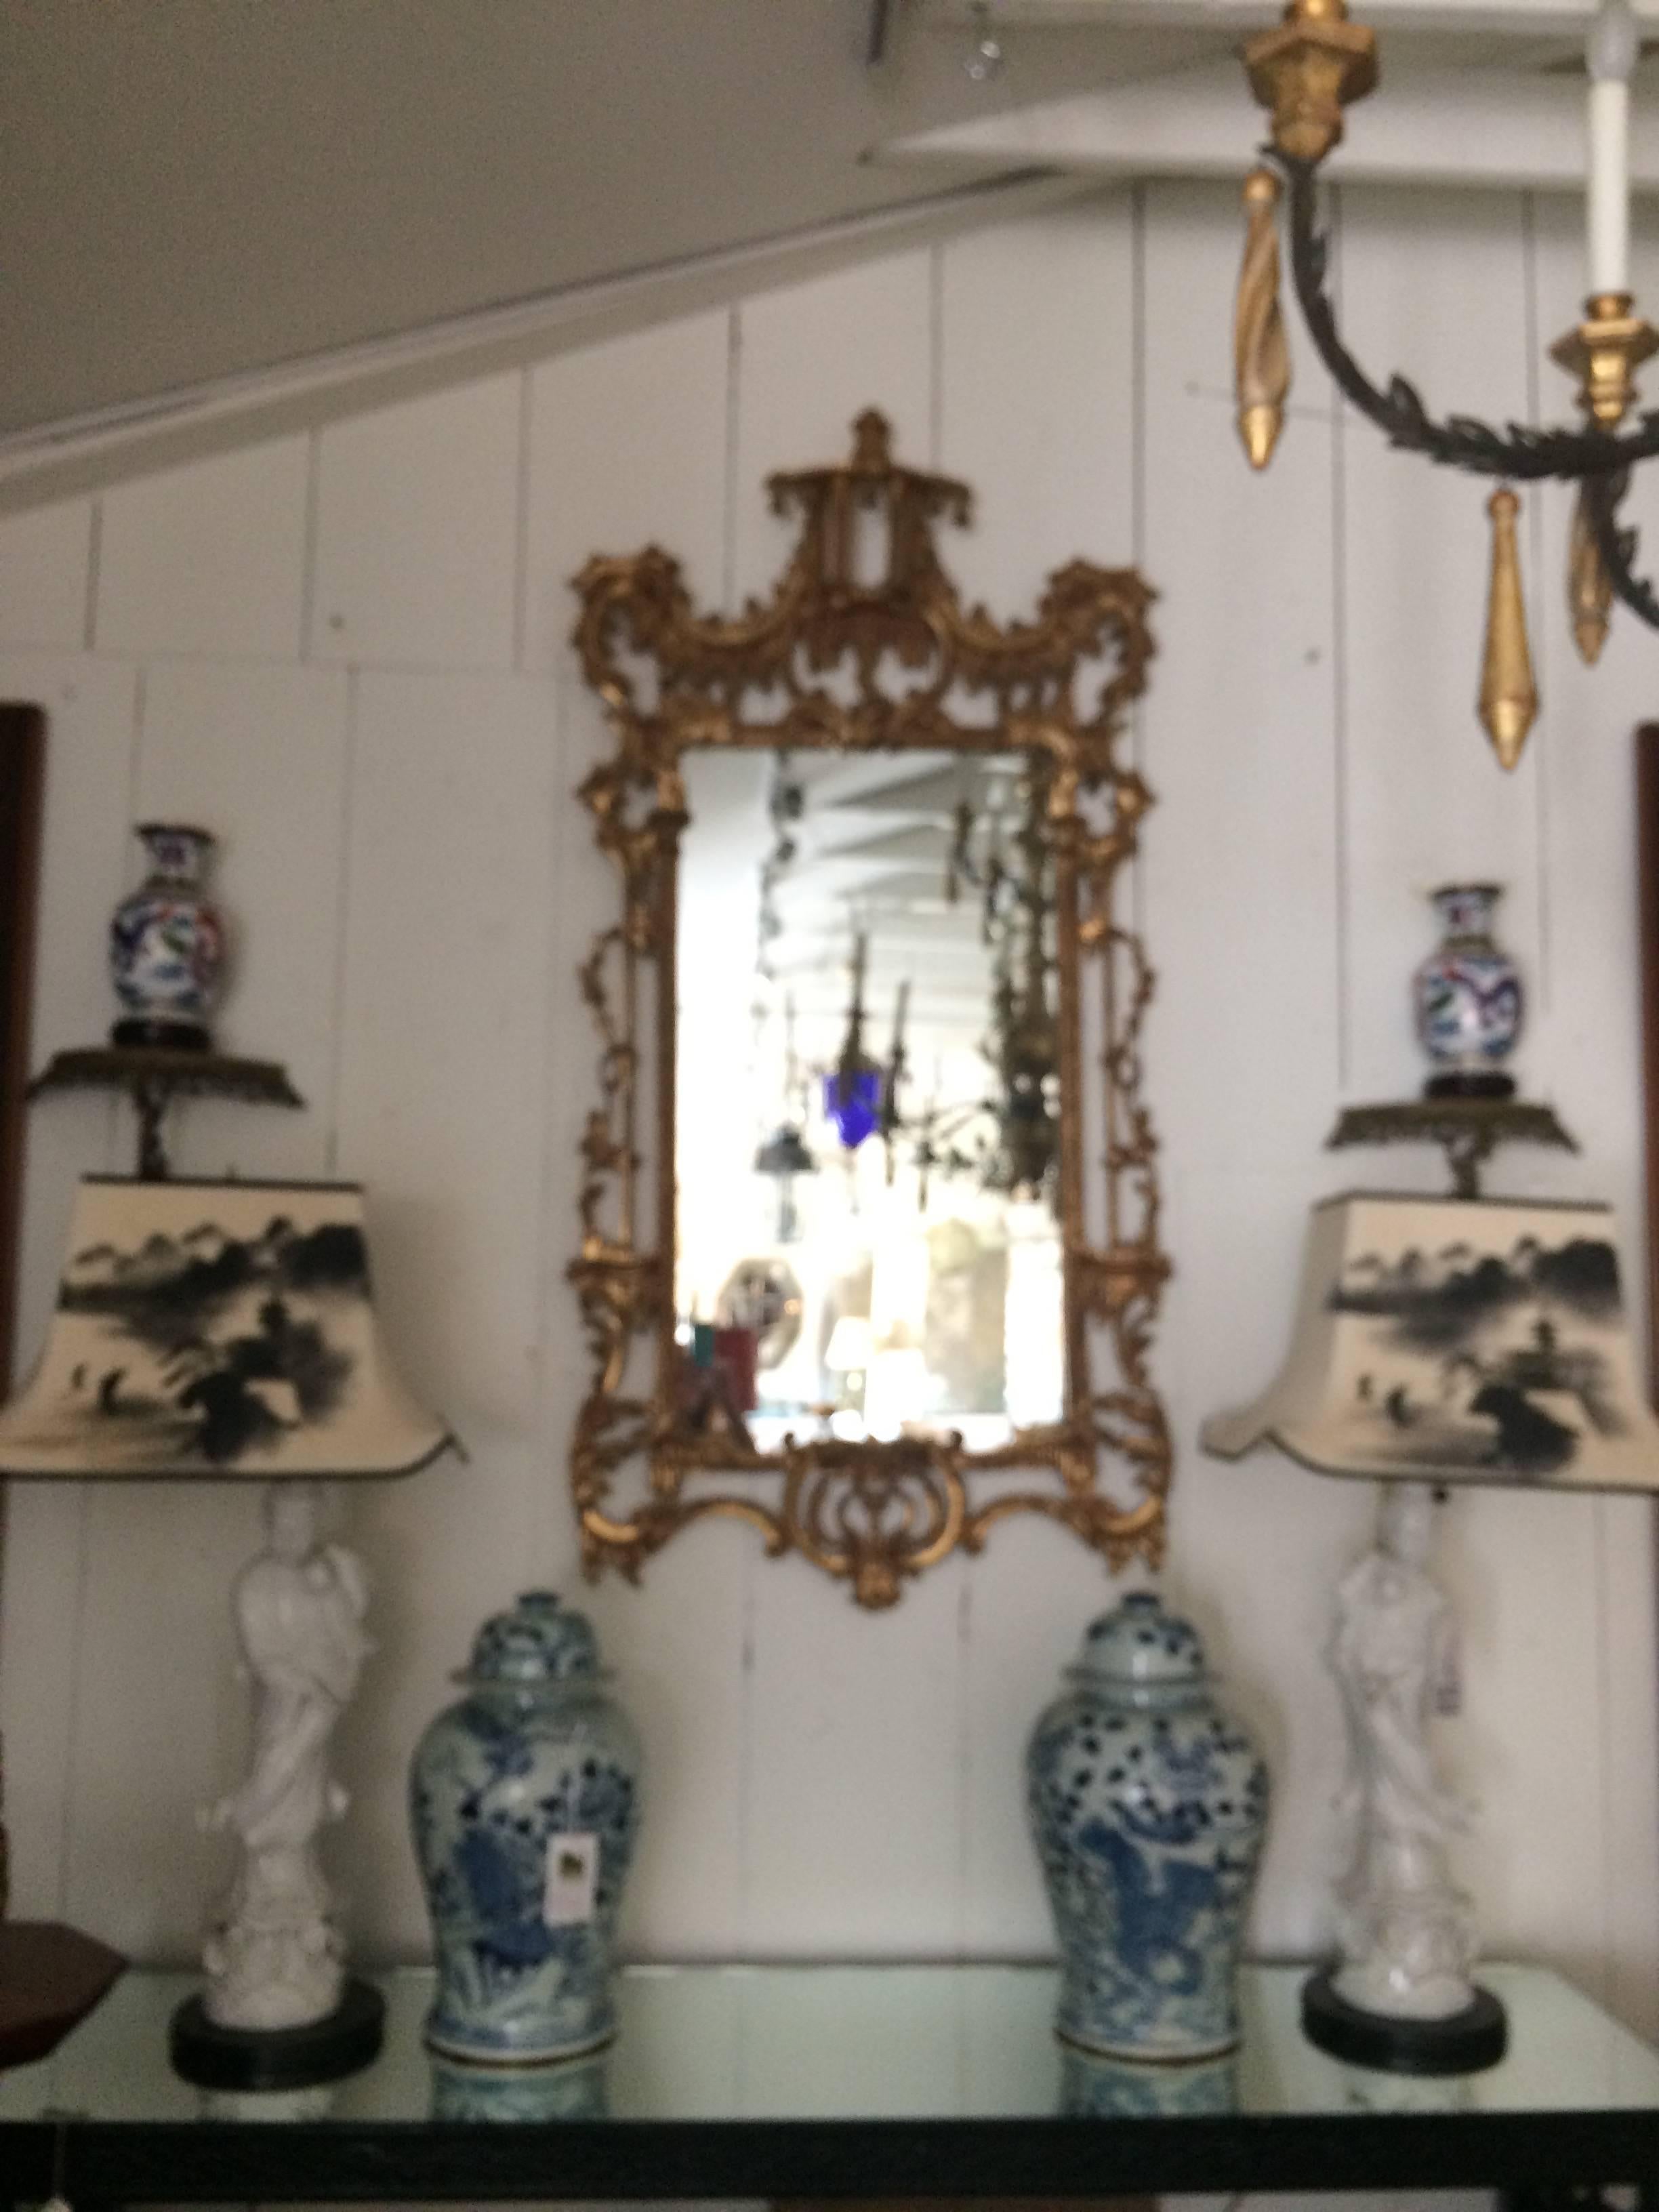 Impressive in scale, a glamorous giltwood carved mirror with pagoda at the top and wooden decorative bells. Would look fabulous mixed with Hollywood Regency furnishings.